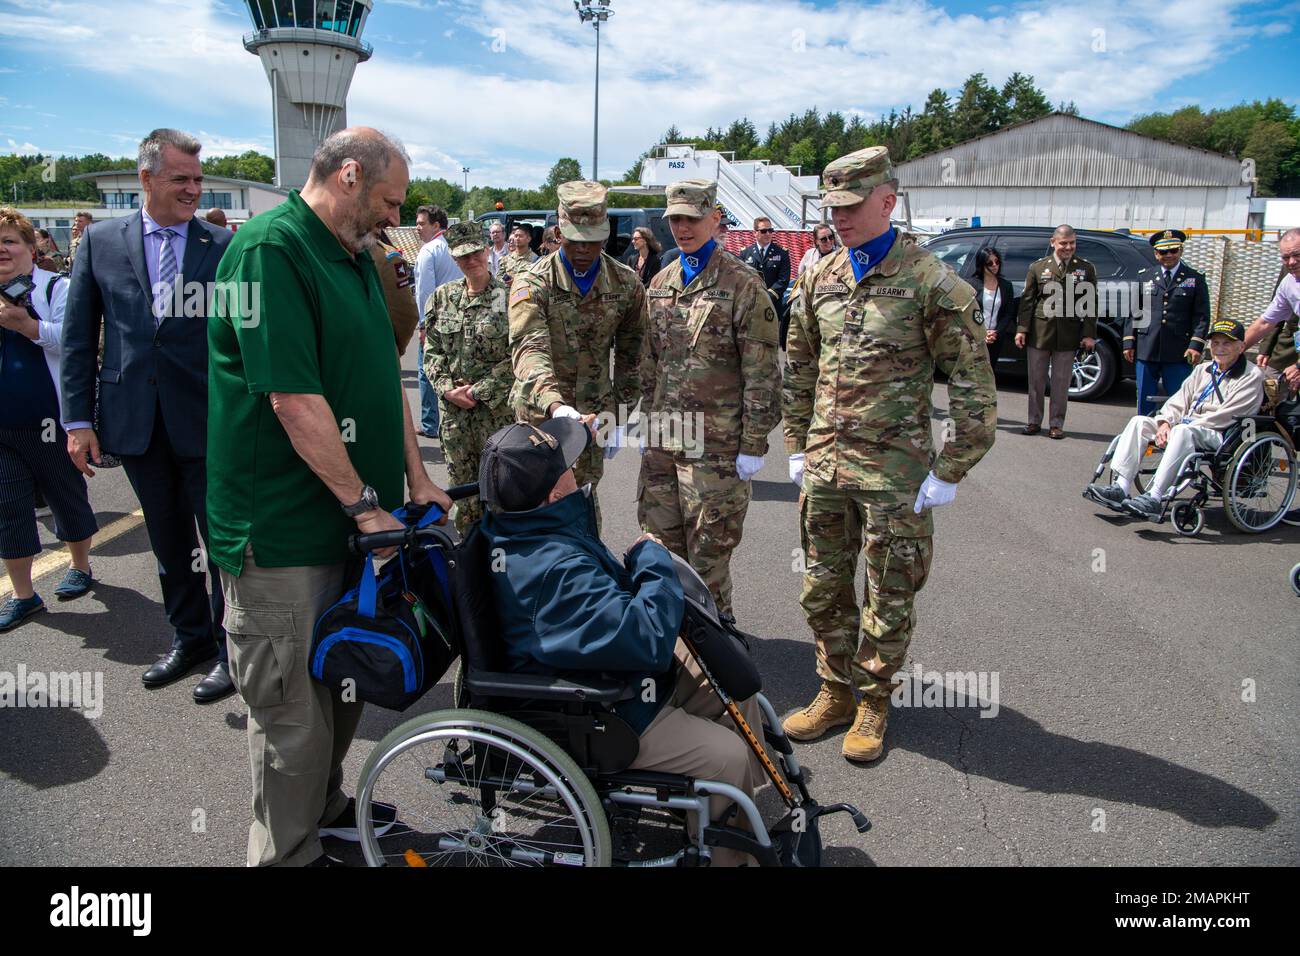 World War II Veterans greet Soldiers of V CORPS at a welcoming ceremony June 2, 2022 at Aéroport de Deauville Saint Gatien des Bois, France. Together, the US and our indispensable European allies are demonstrating the strength of alliance and dedicated resolve borne out of D-Day 78 years ago and forged over almost eight decades of combat-credible cooperative security. Stock Photo